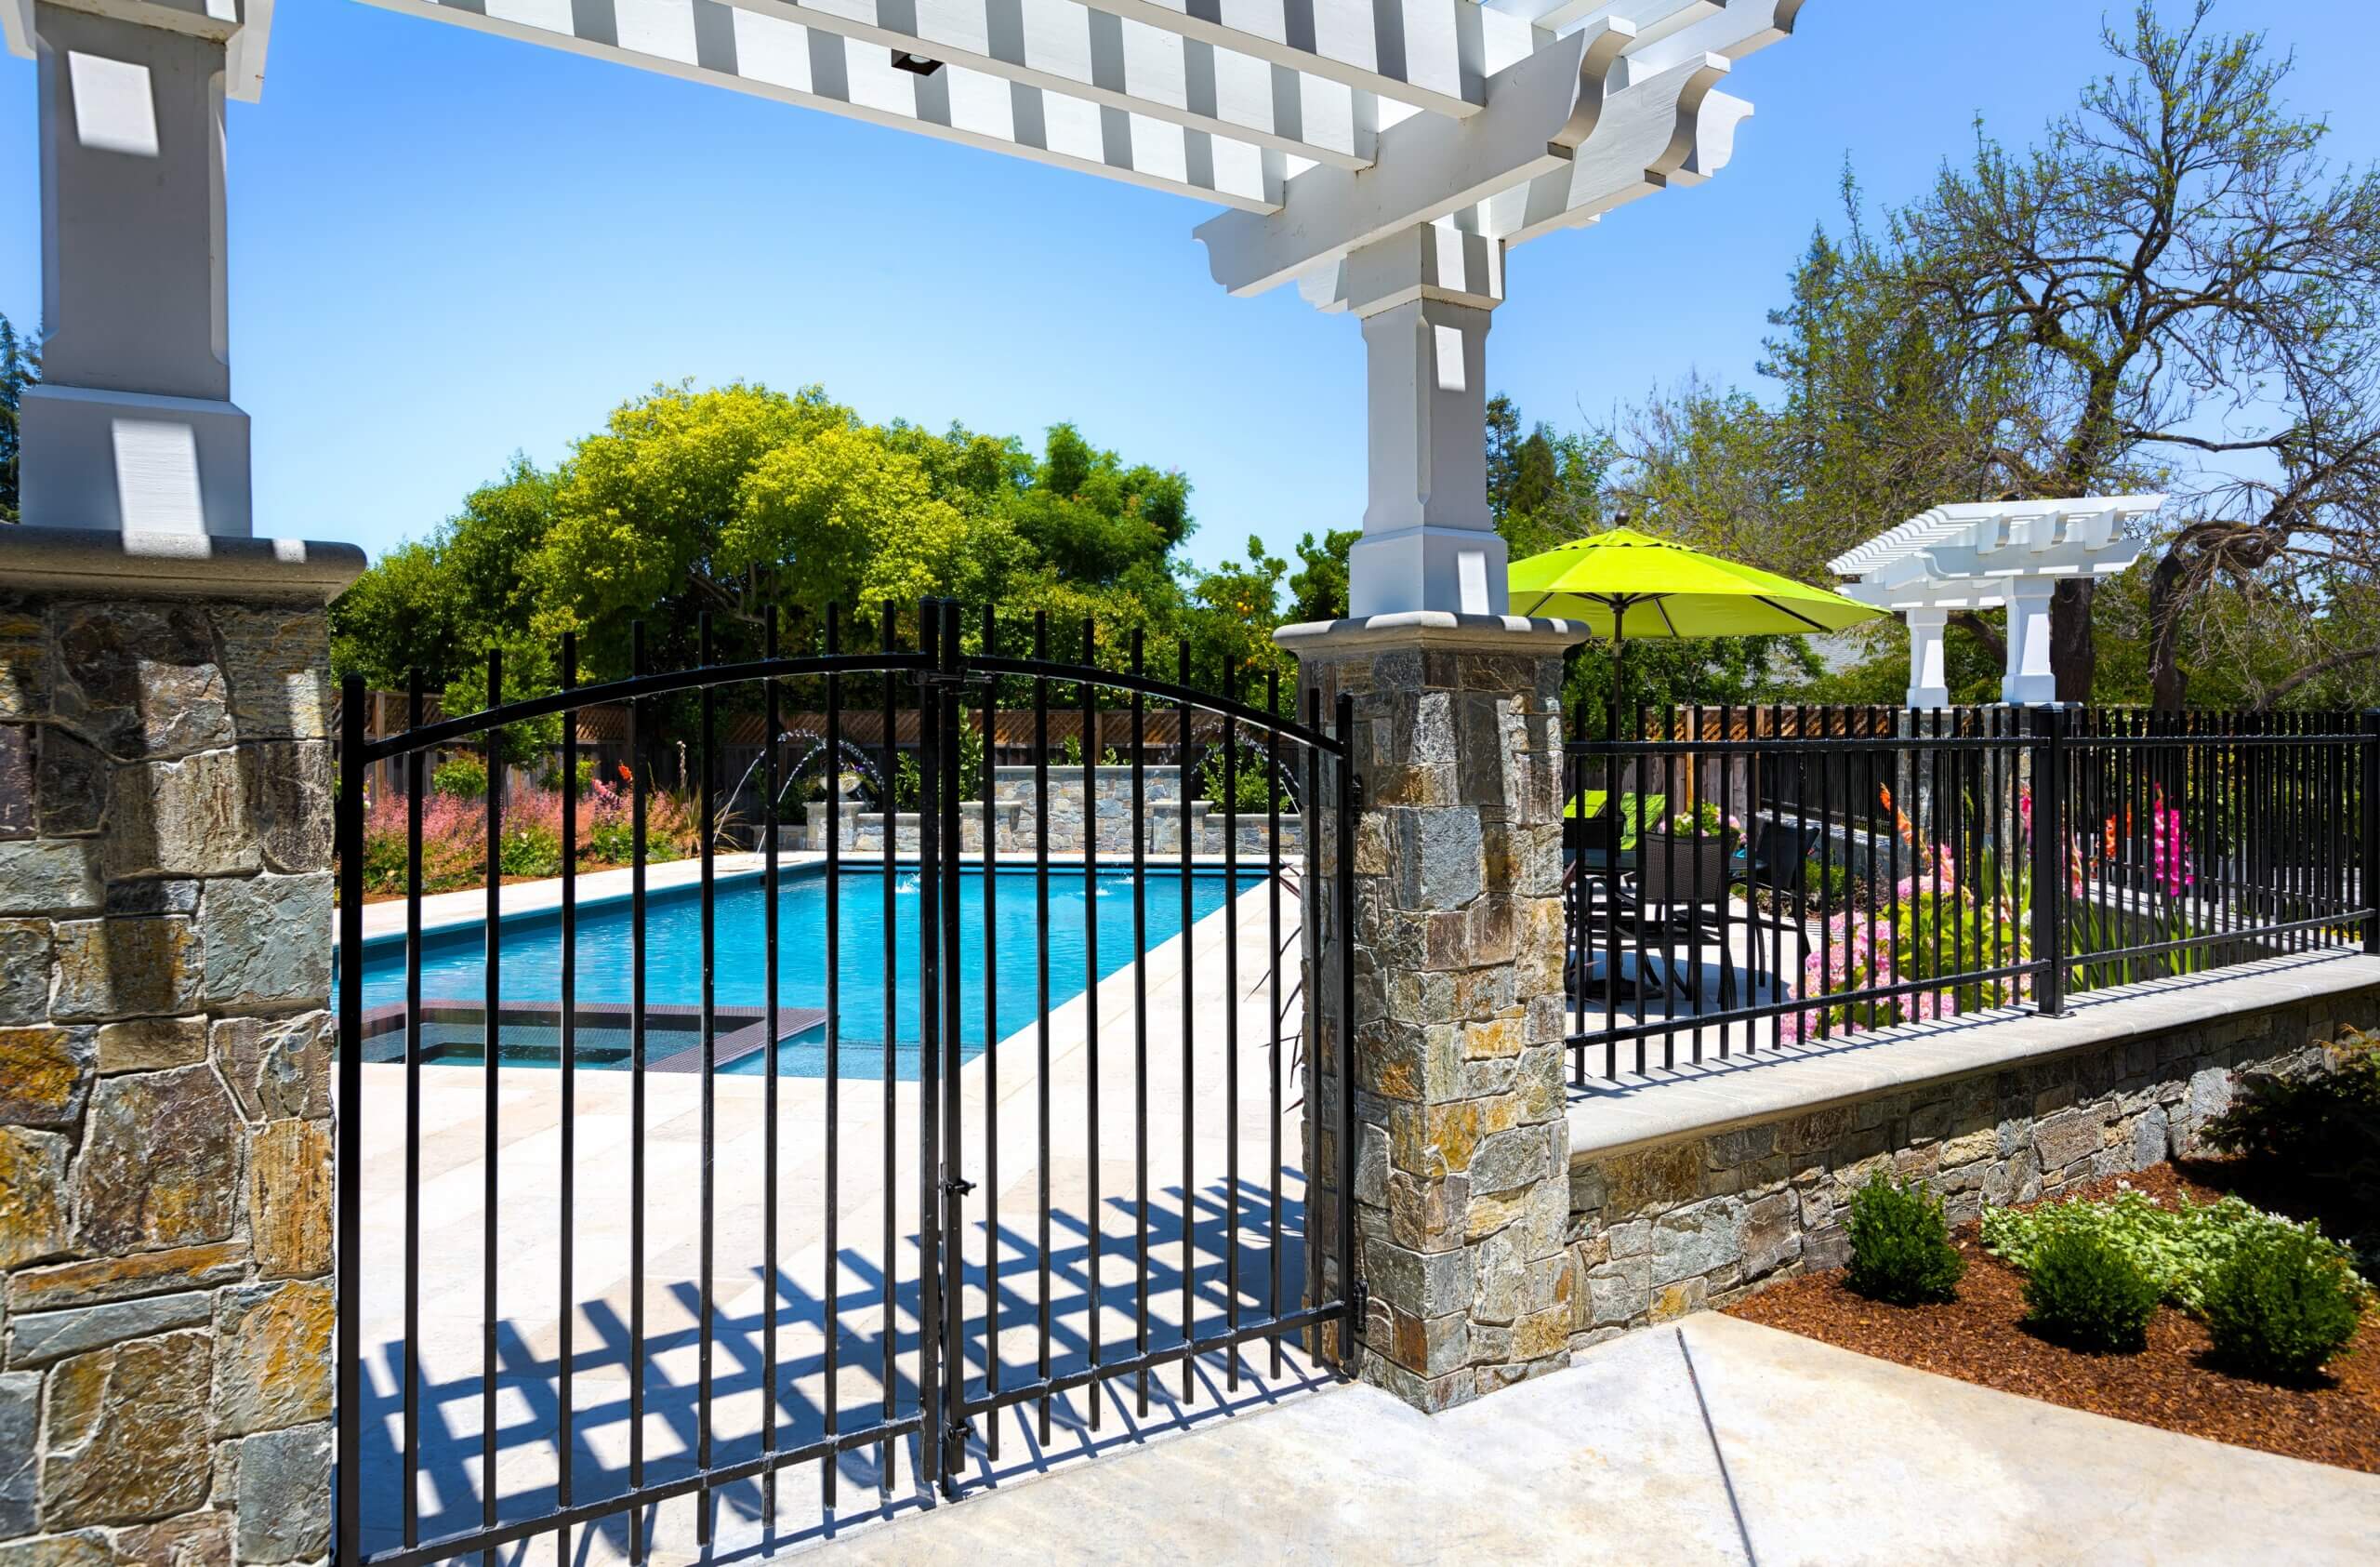 Large family swimming pool protected by large custom iron safety fence